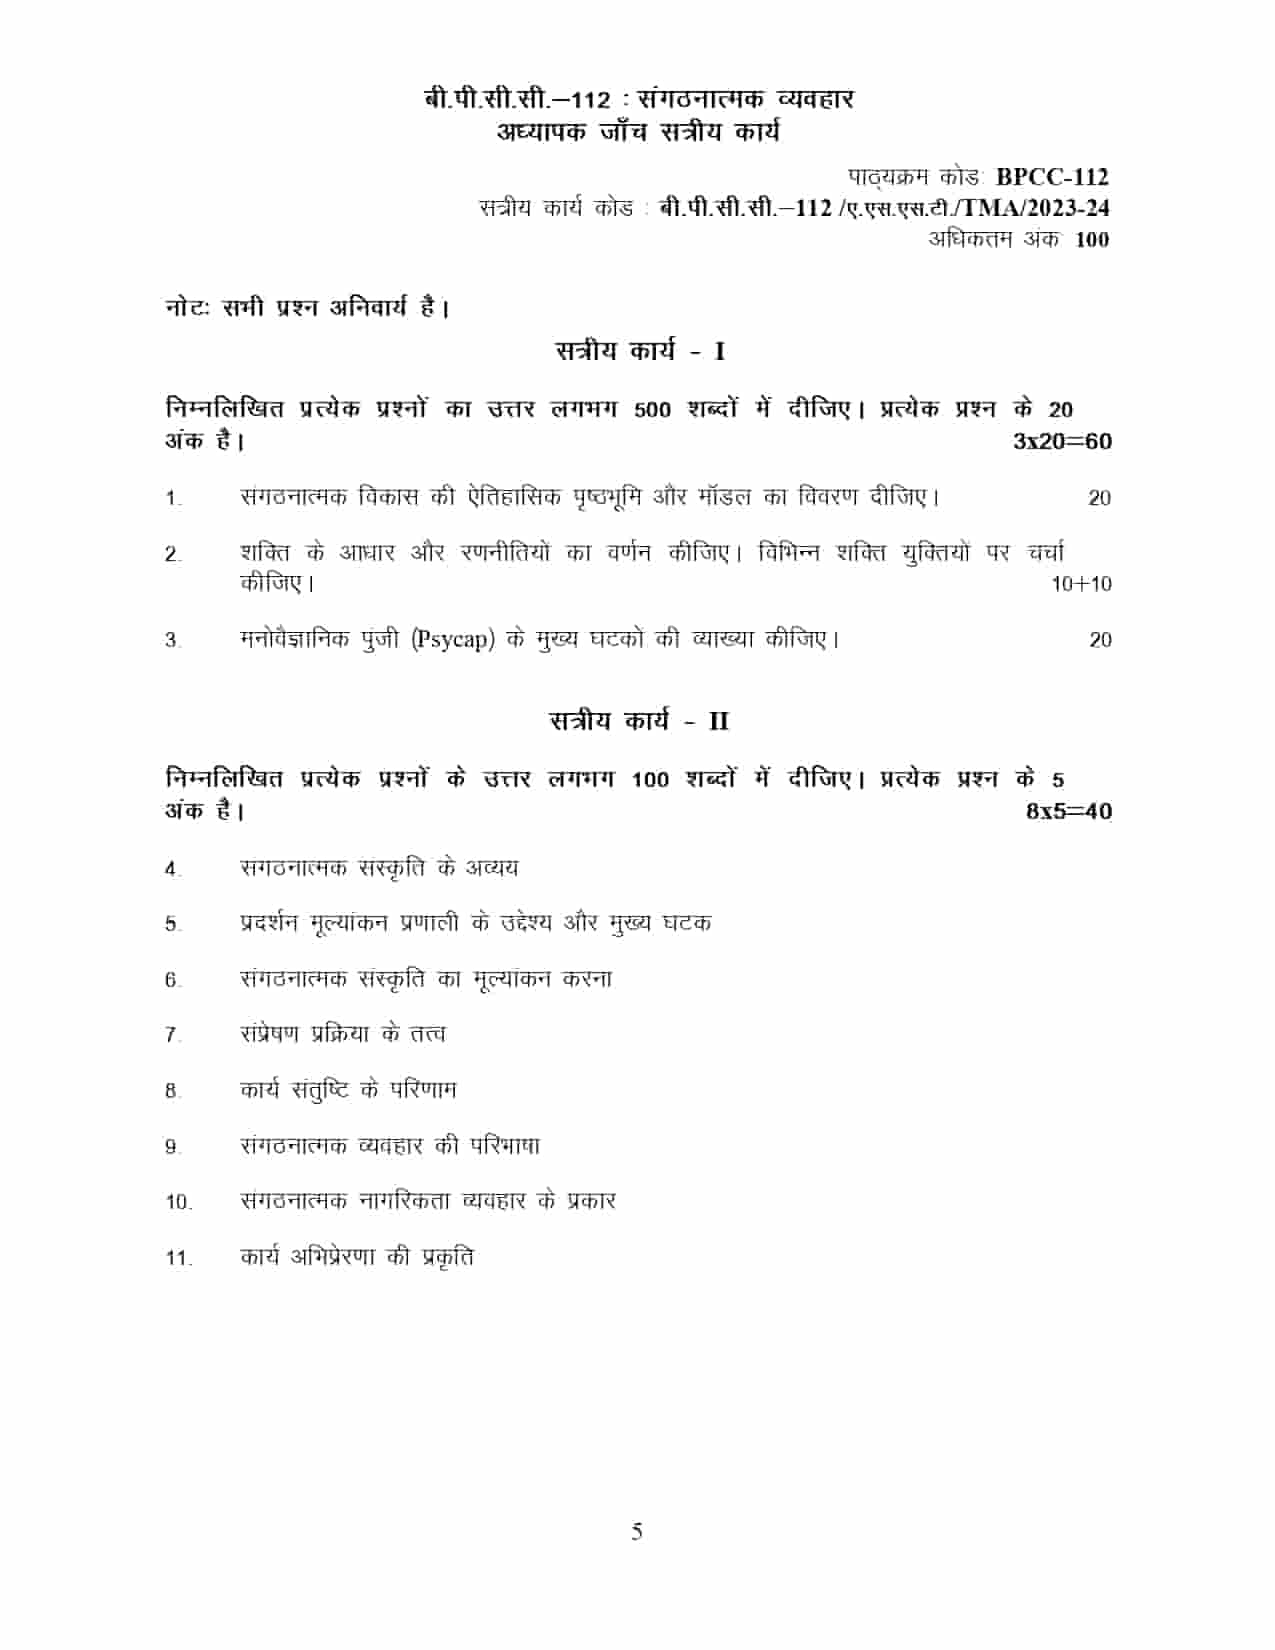 IGNOU BPCC 112 HINDI SOLVED ASSIGNMENT 2023-24